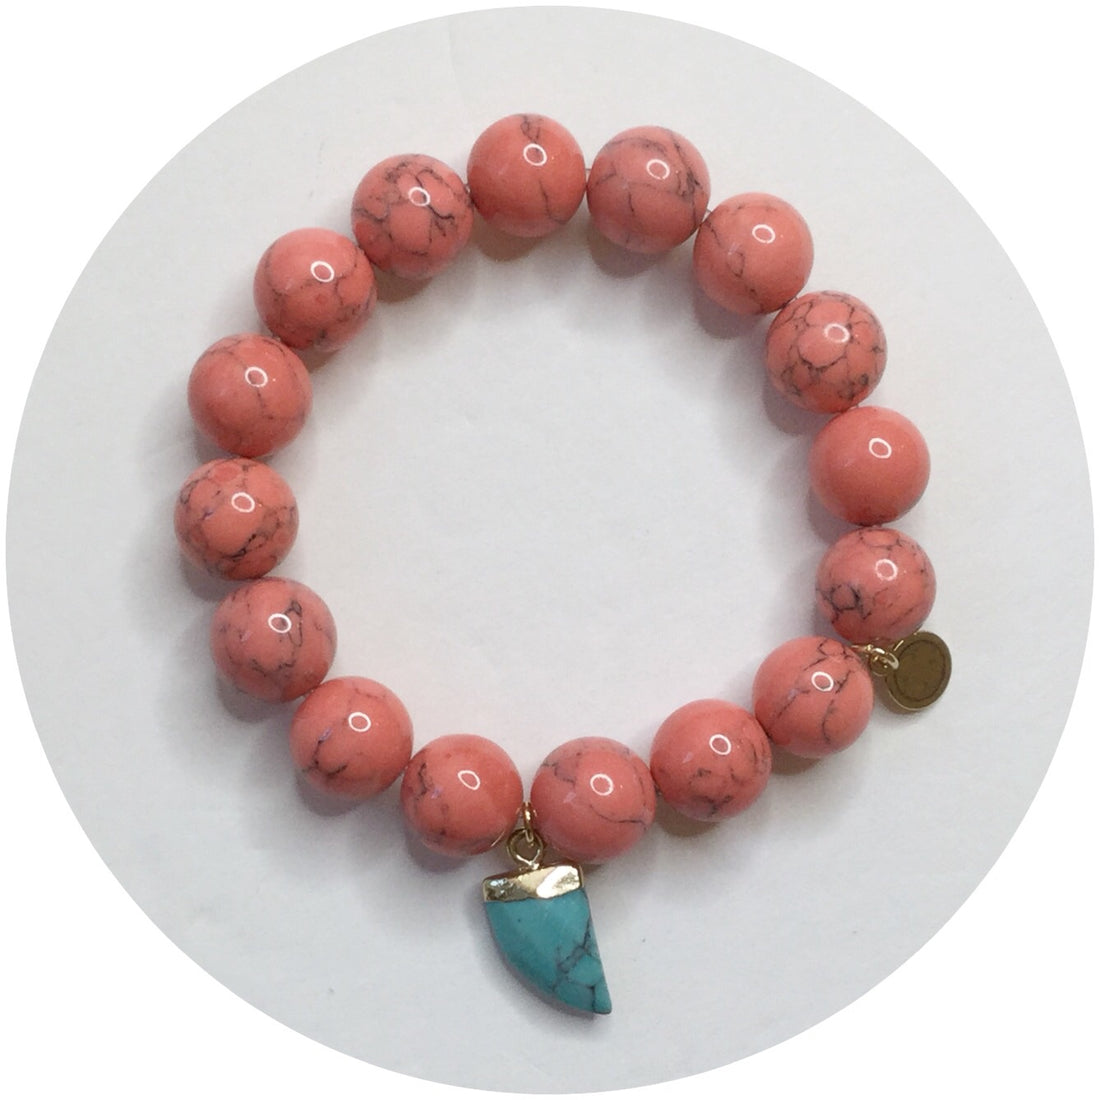 Coral Pink Howlite with Turquoise Horn Pendant - Oriana Lamarca LLC